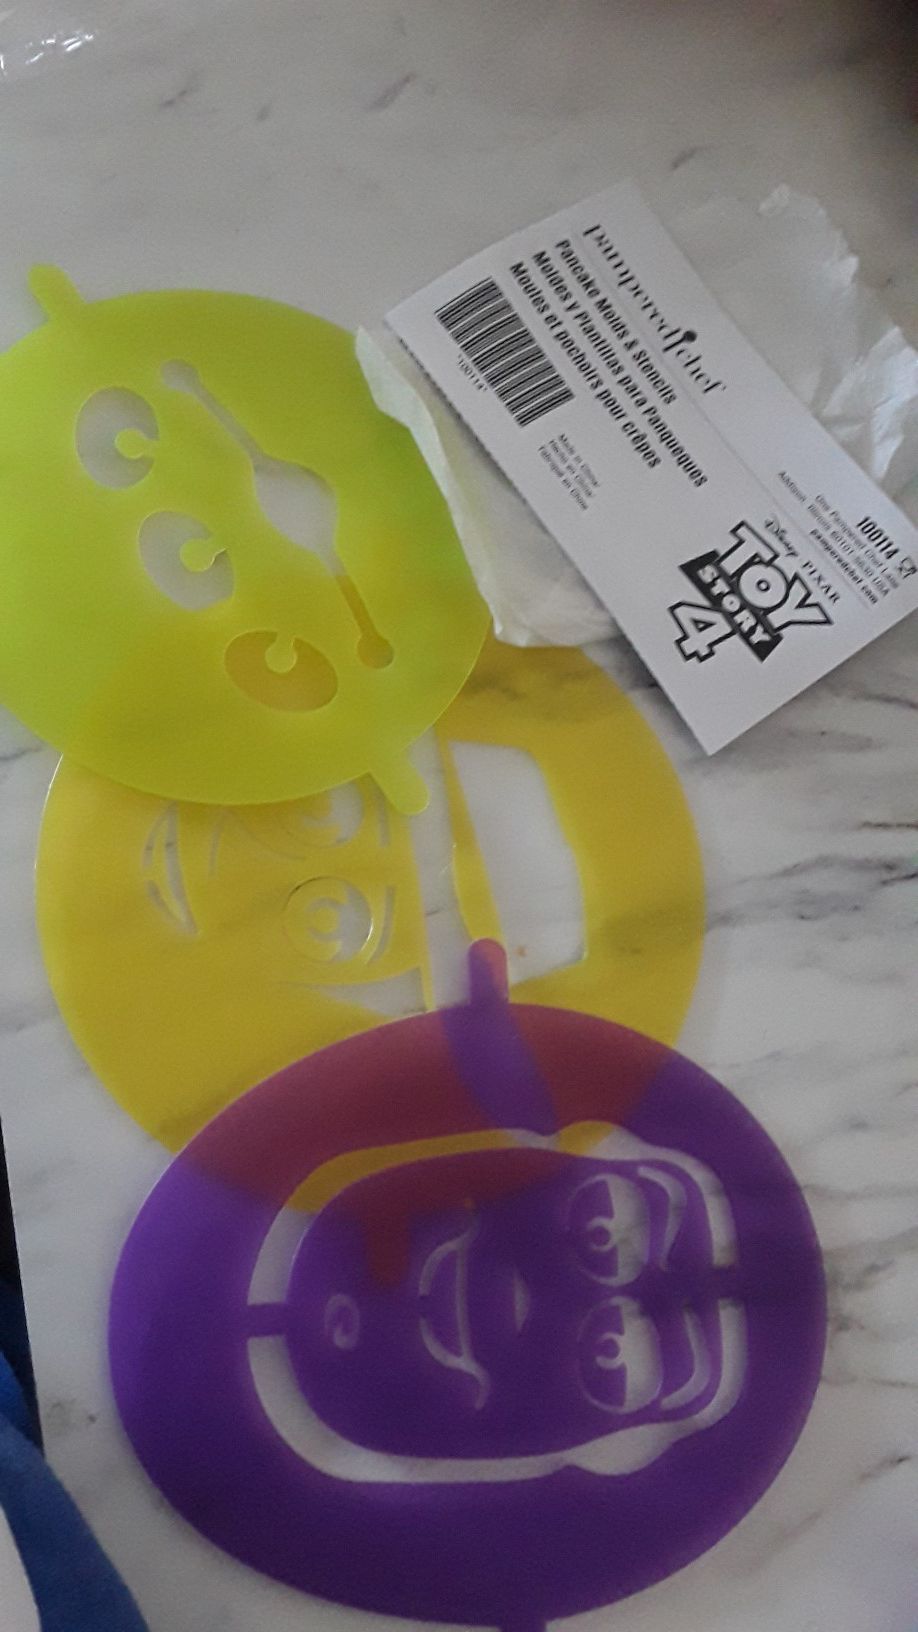 Pampered chef Toy story 4 pancake molds and stencils set